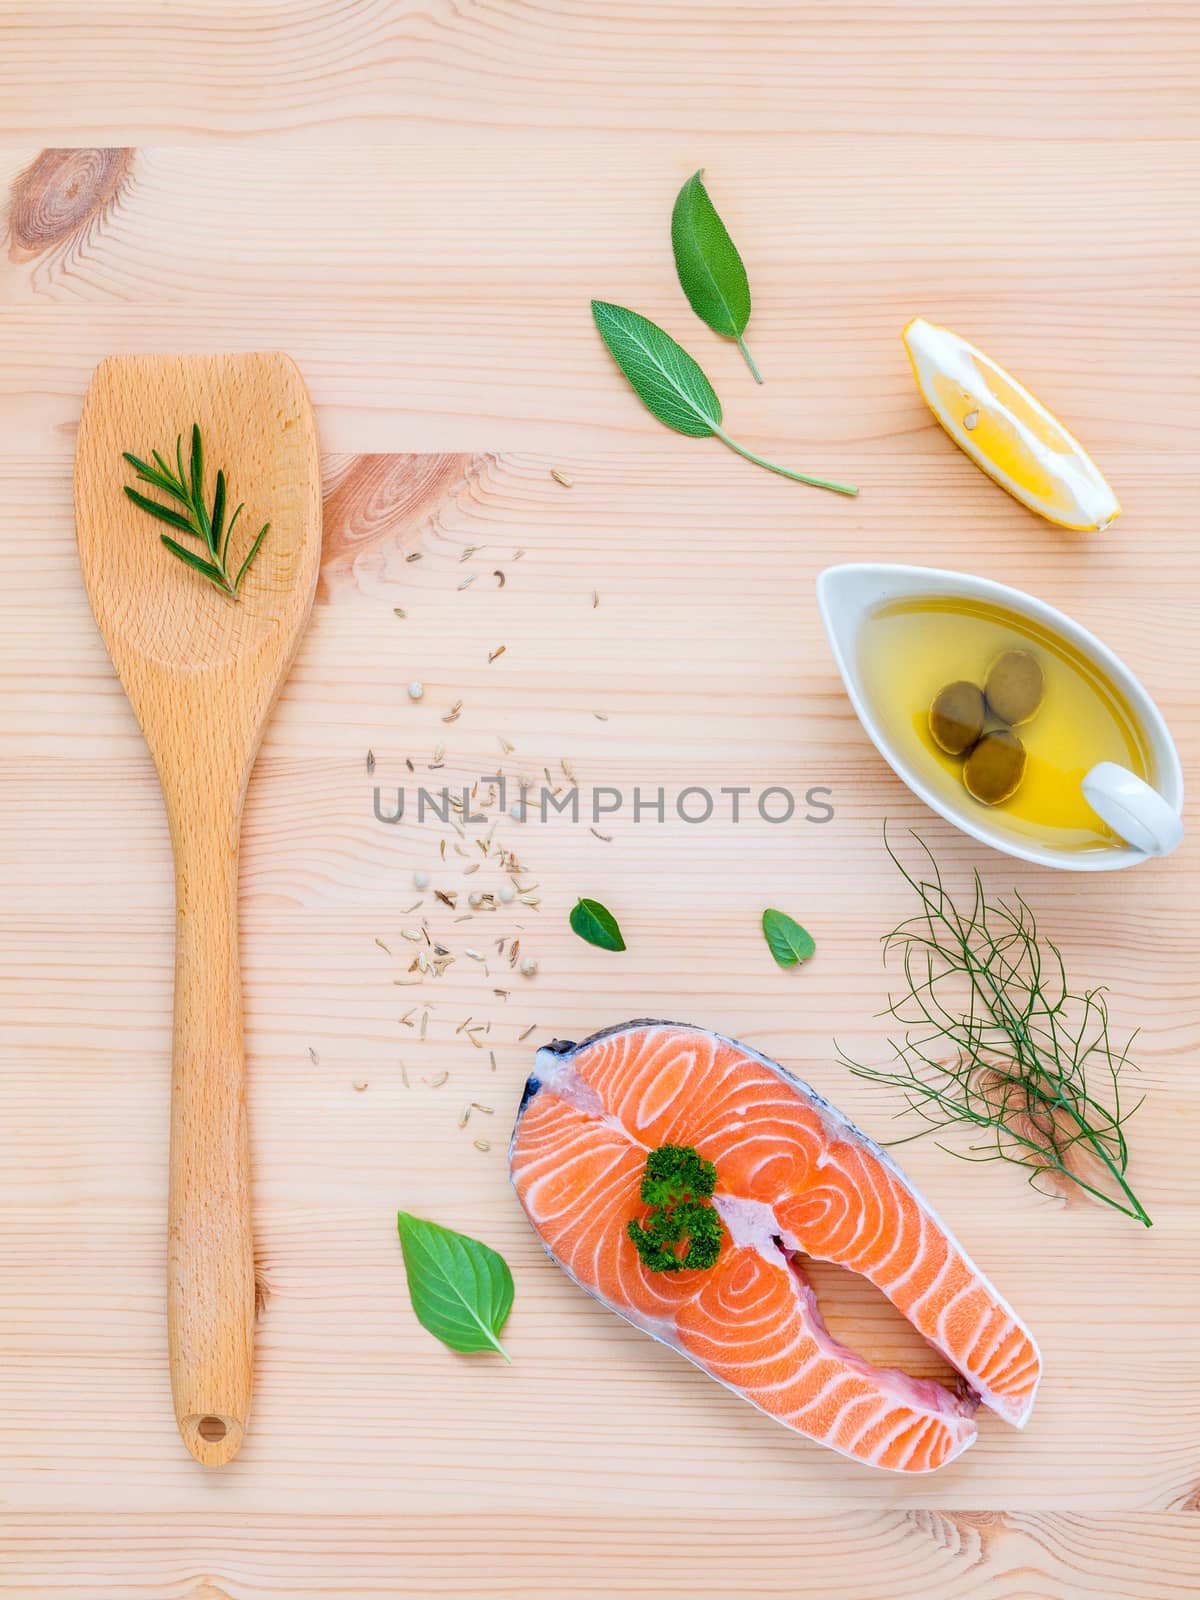 Raw salmon fillet in the white bowl with ingredients olive oil ,sea salt, and herbs  fennel ,sage ,rosemary ,garlic ,pepper and lemon for cooking on wooden background .